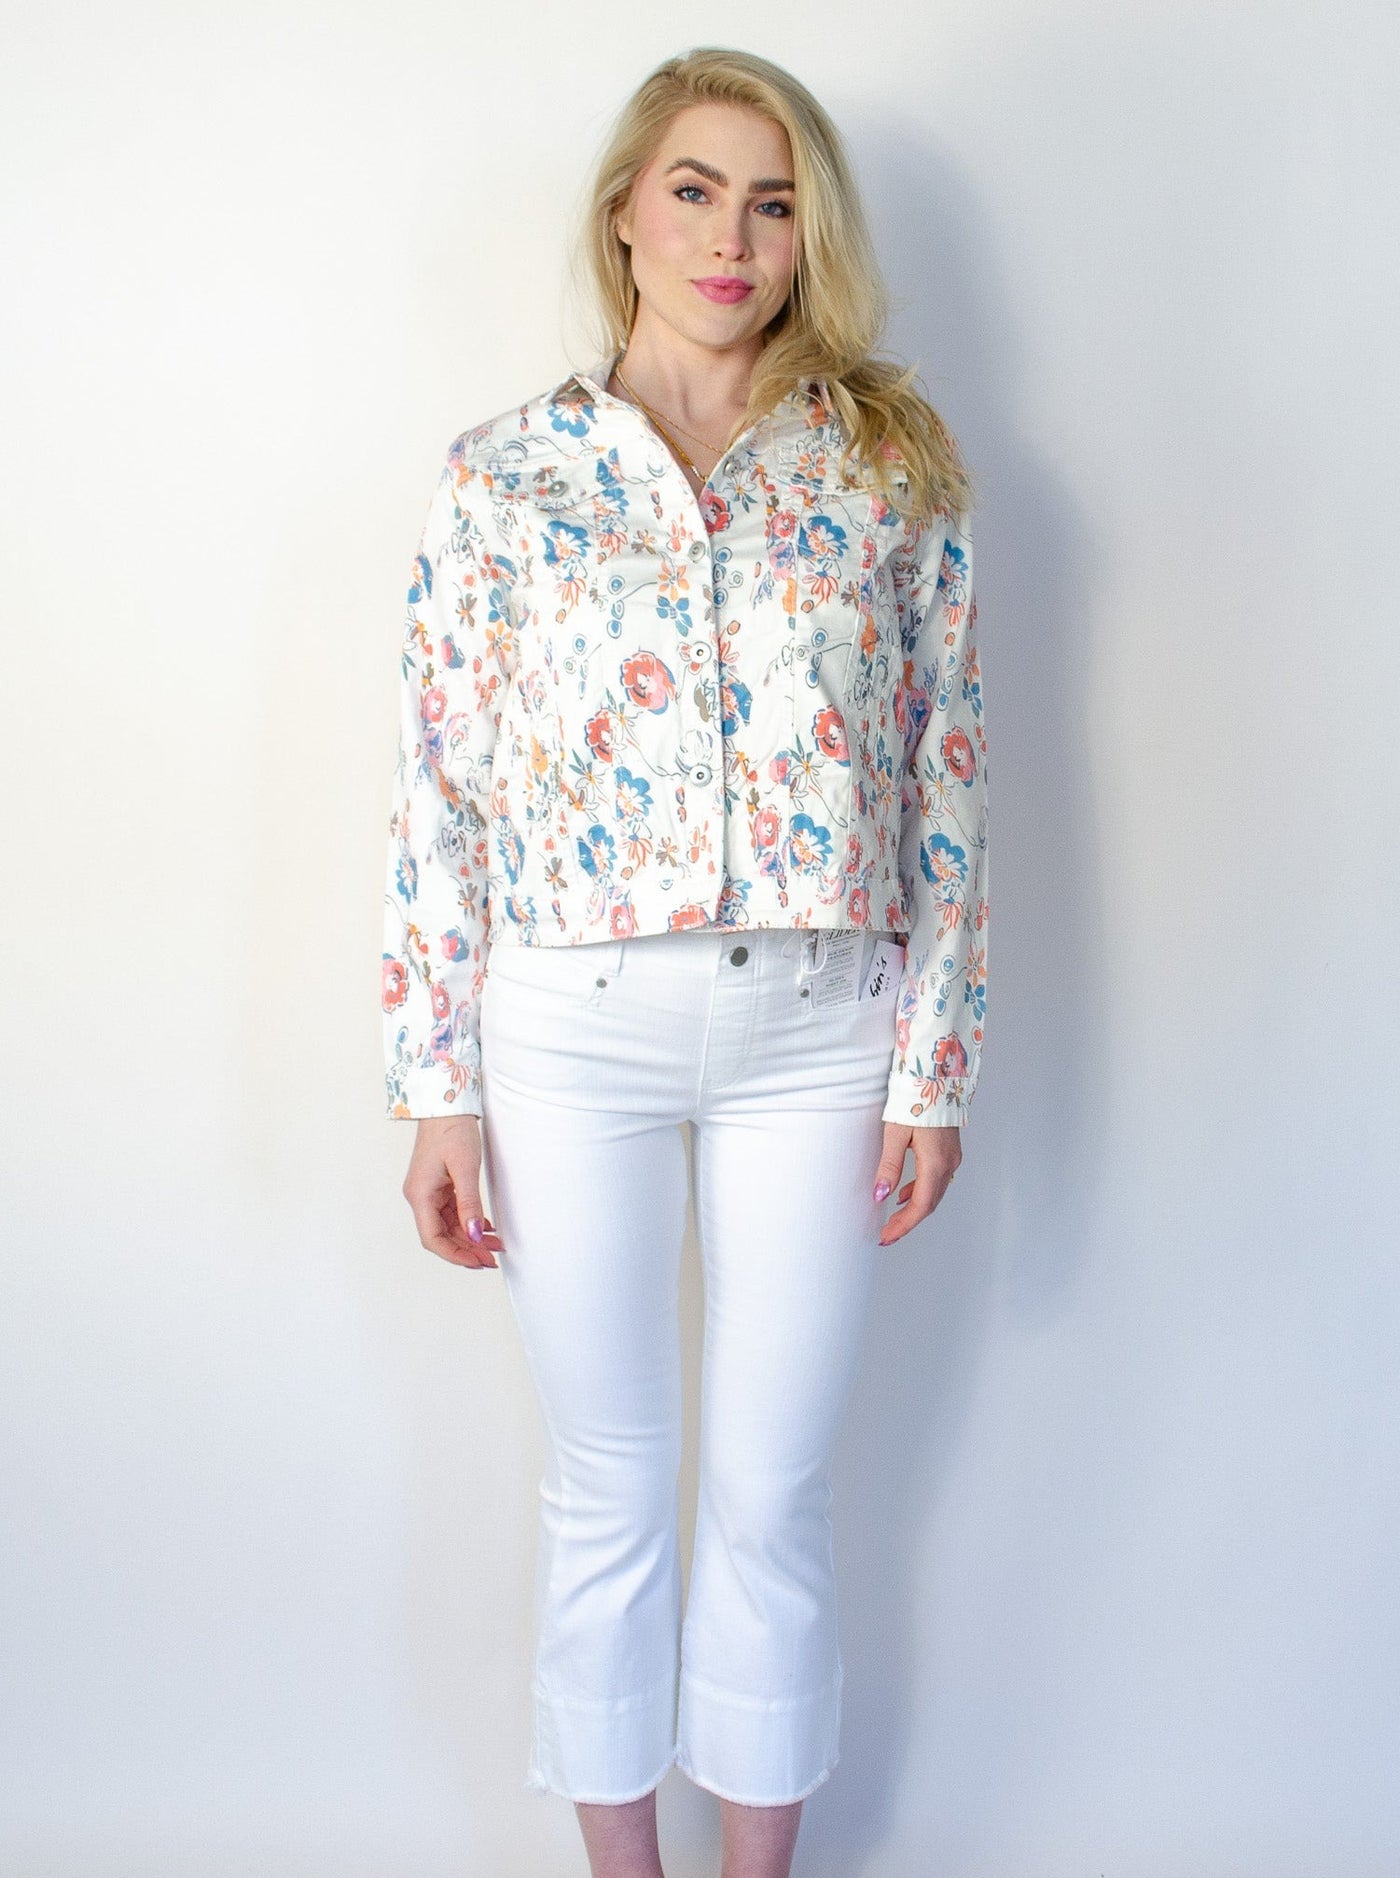 Model is wearing a white denim jean jacket with floral printed detail. Jean jacket is worn with white jeans.